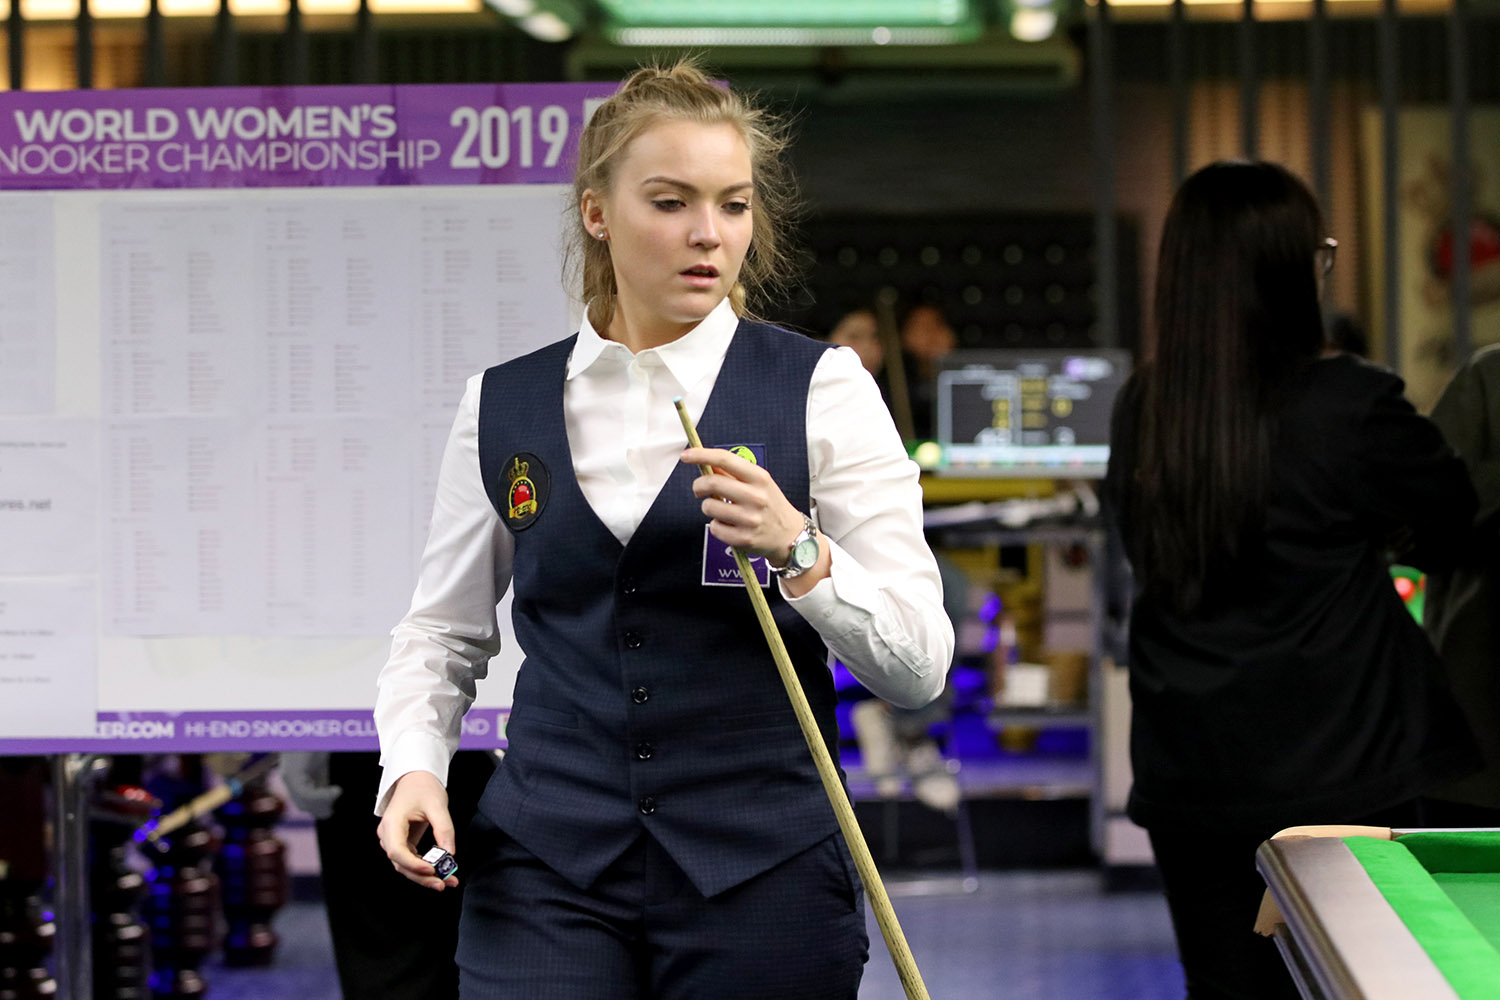 World Womens Snooker Rankings Review 2018/19